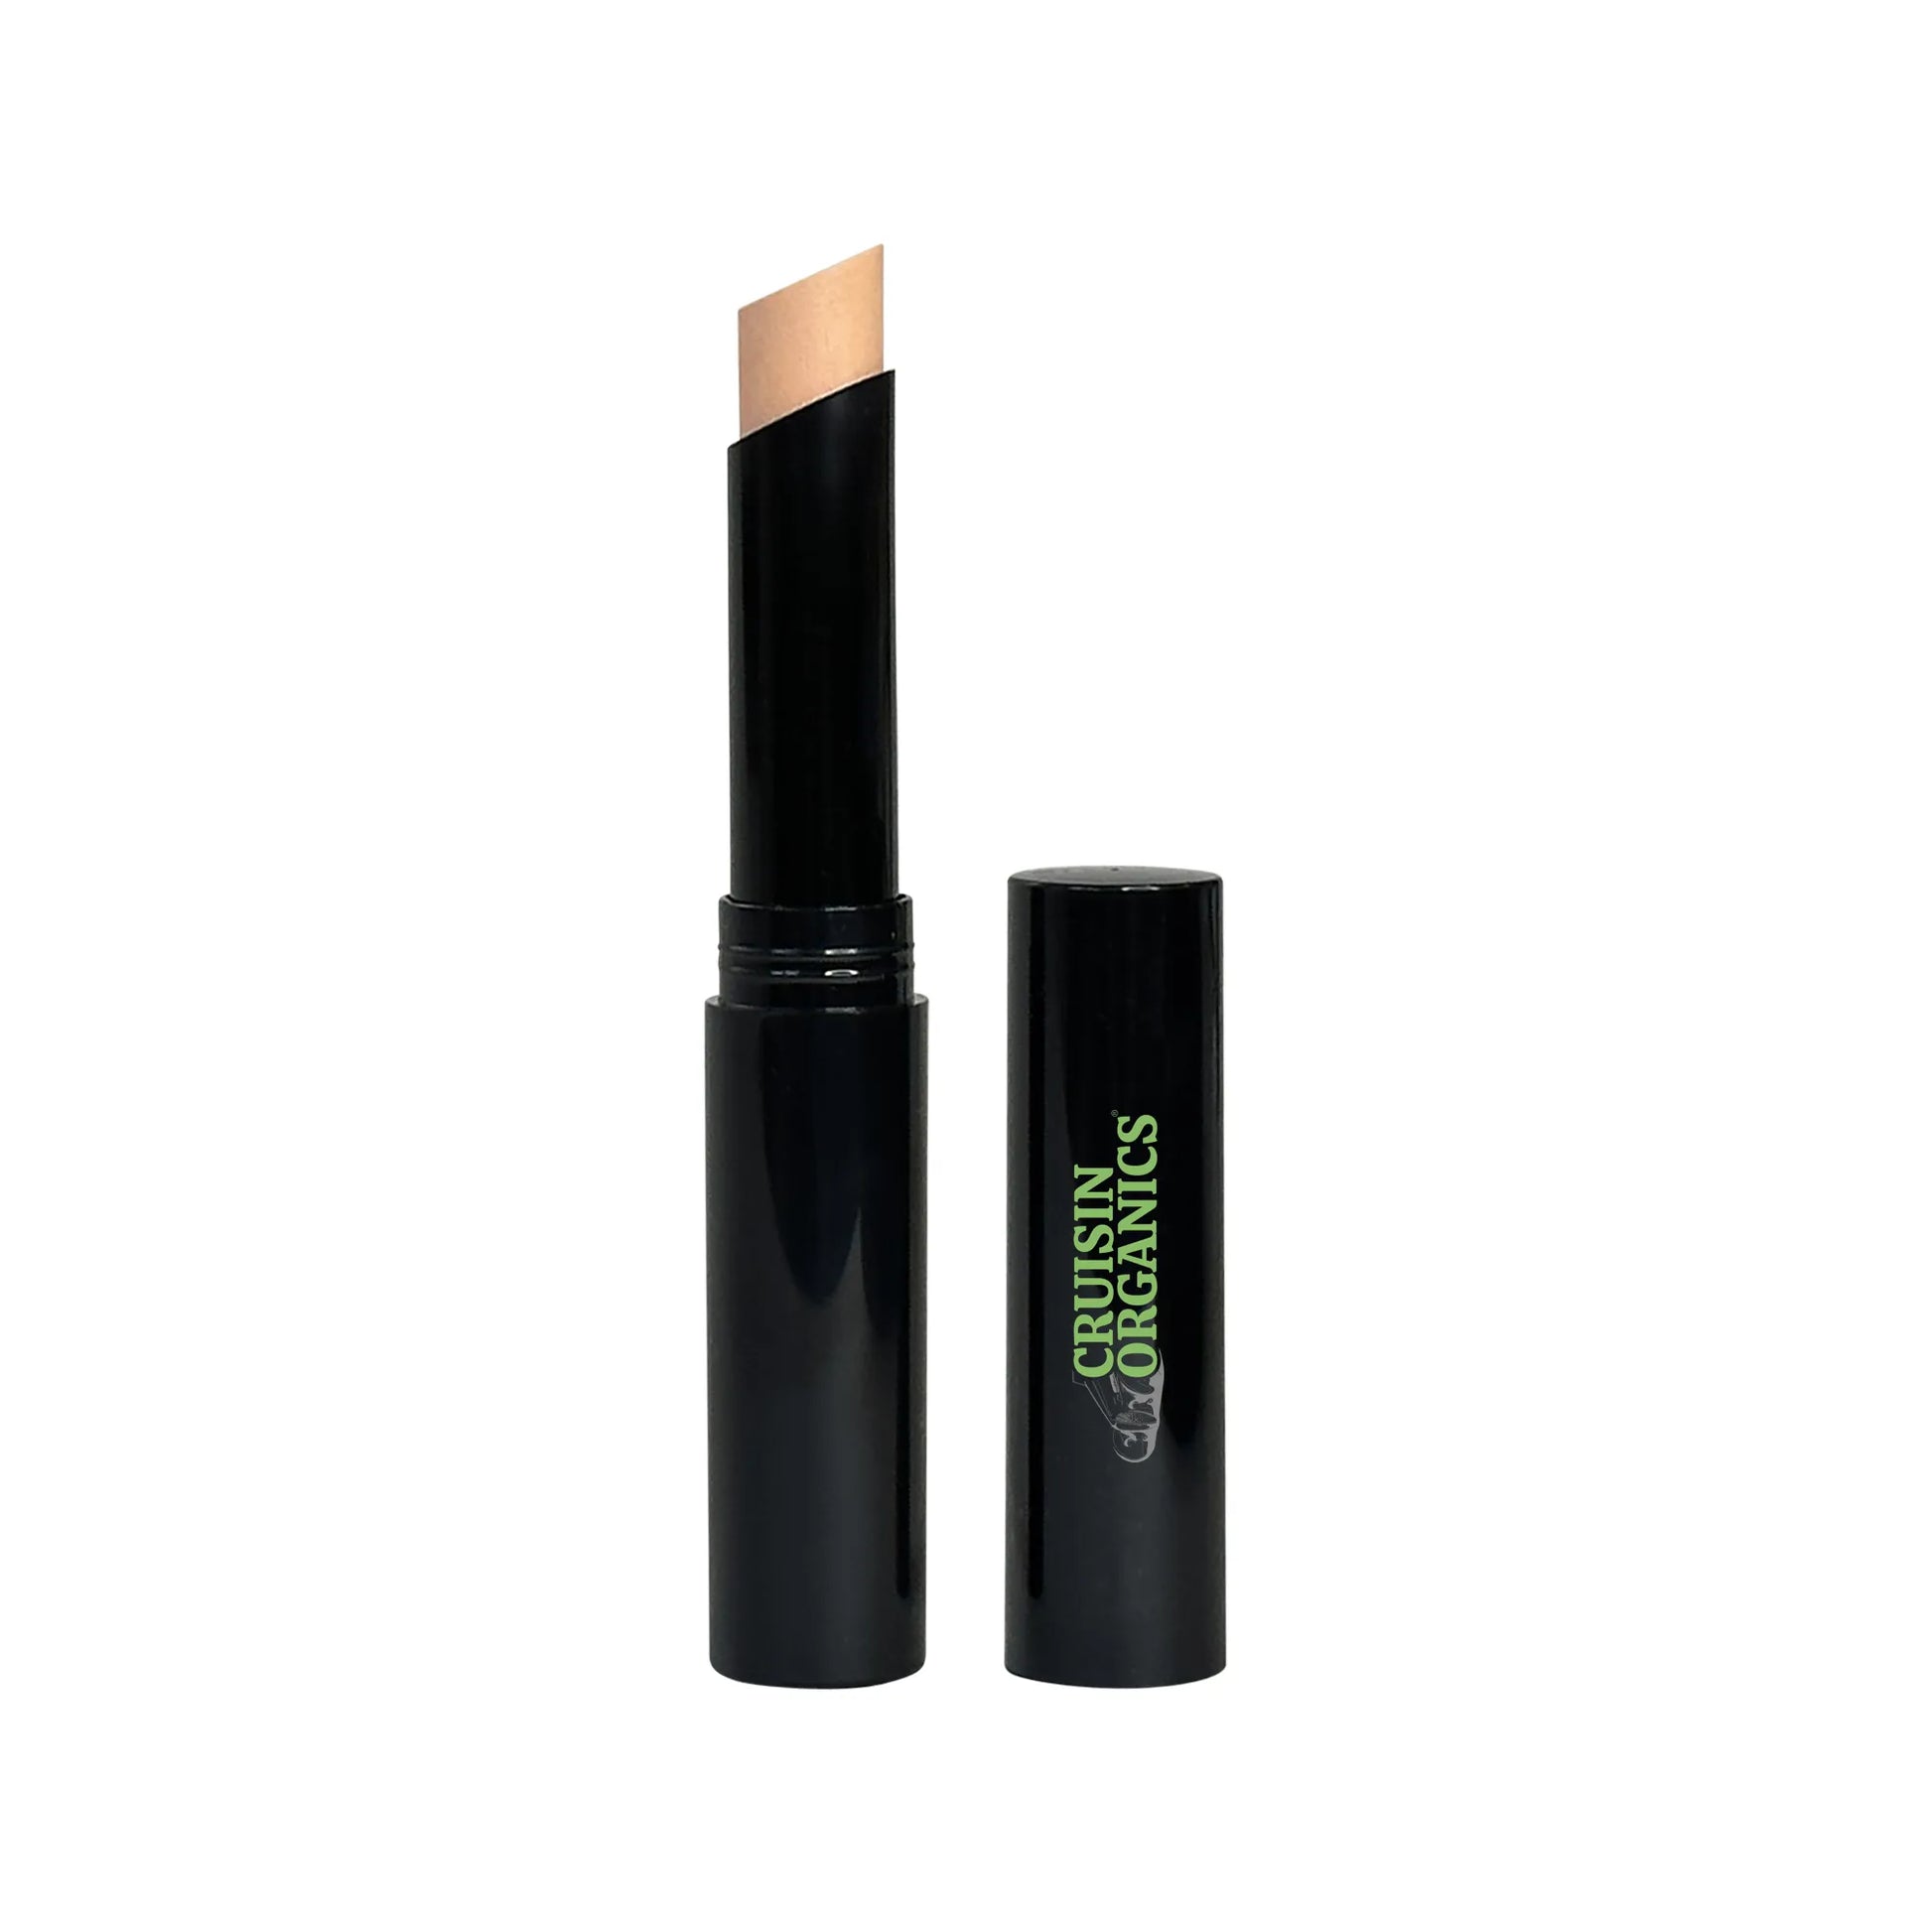 Reduce dark spots with this compact concealer stick. Use darker shades for contouring and lighter shades for highlighting. Provides medium to full coverage with a matte finish. Perfect for on-the-go touch-ups and travel.